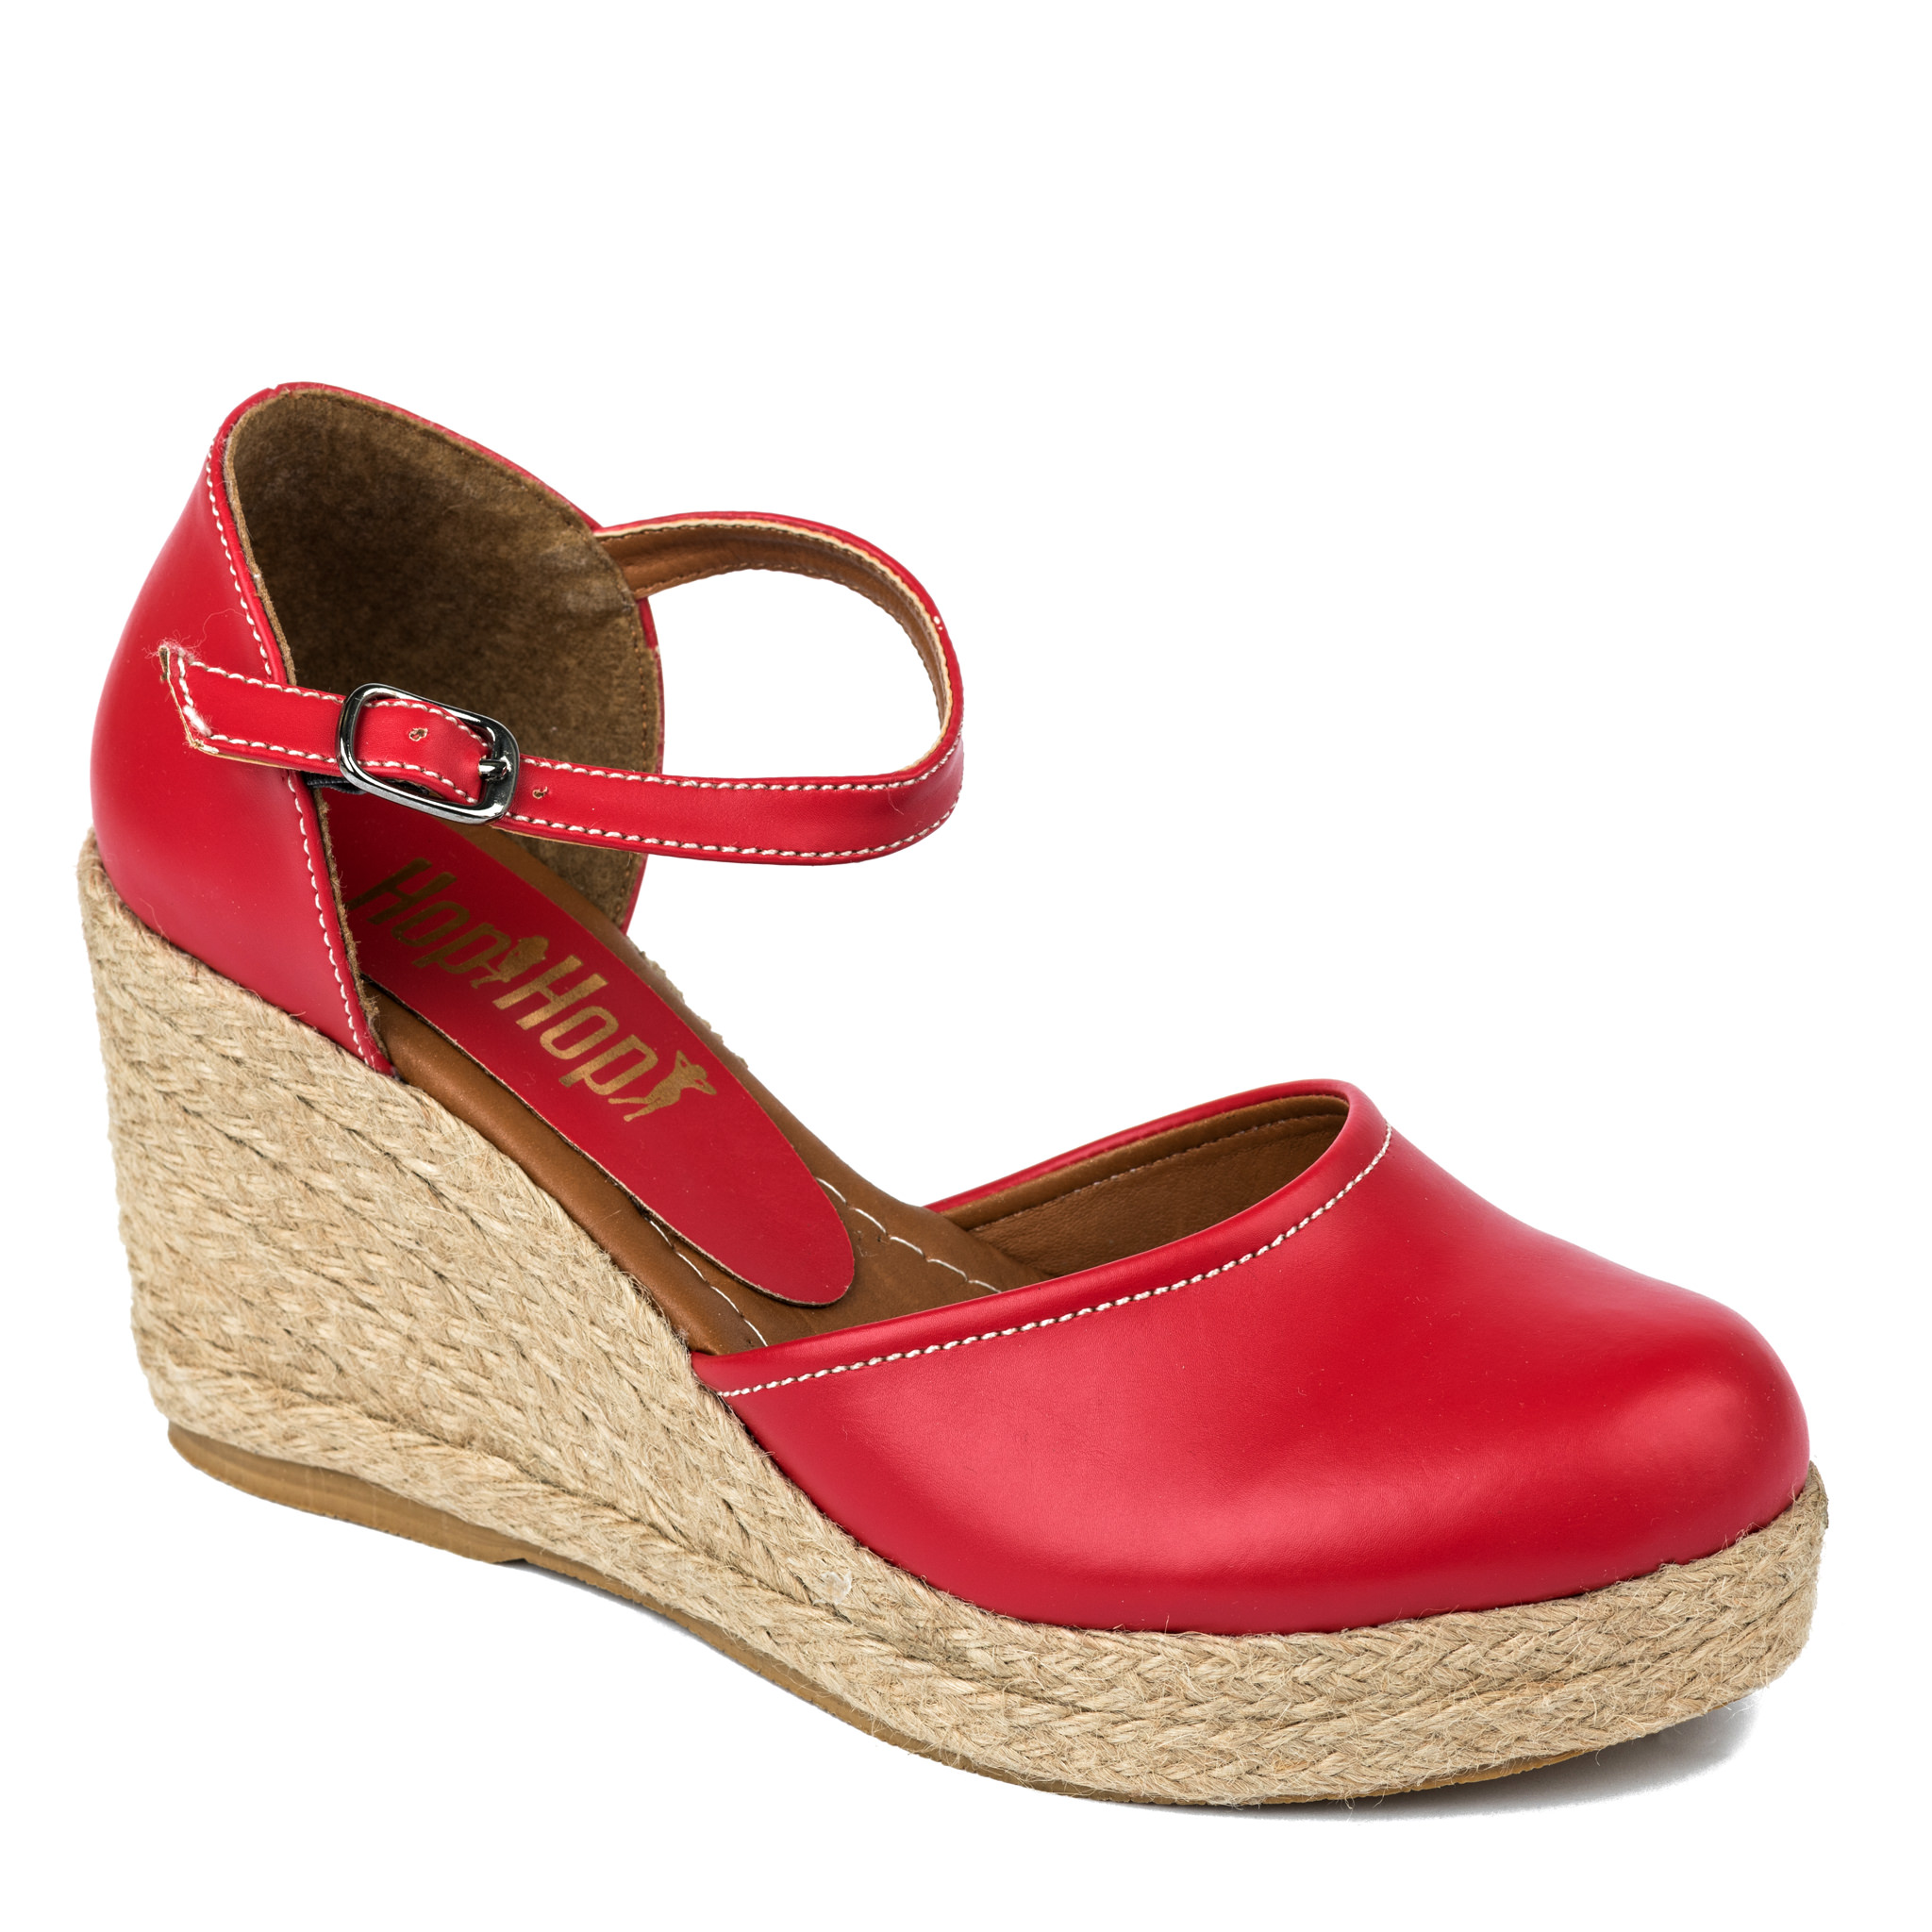 WEDGE SANDALS WITH JUTA - RED